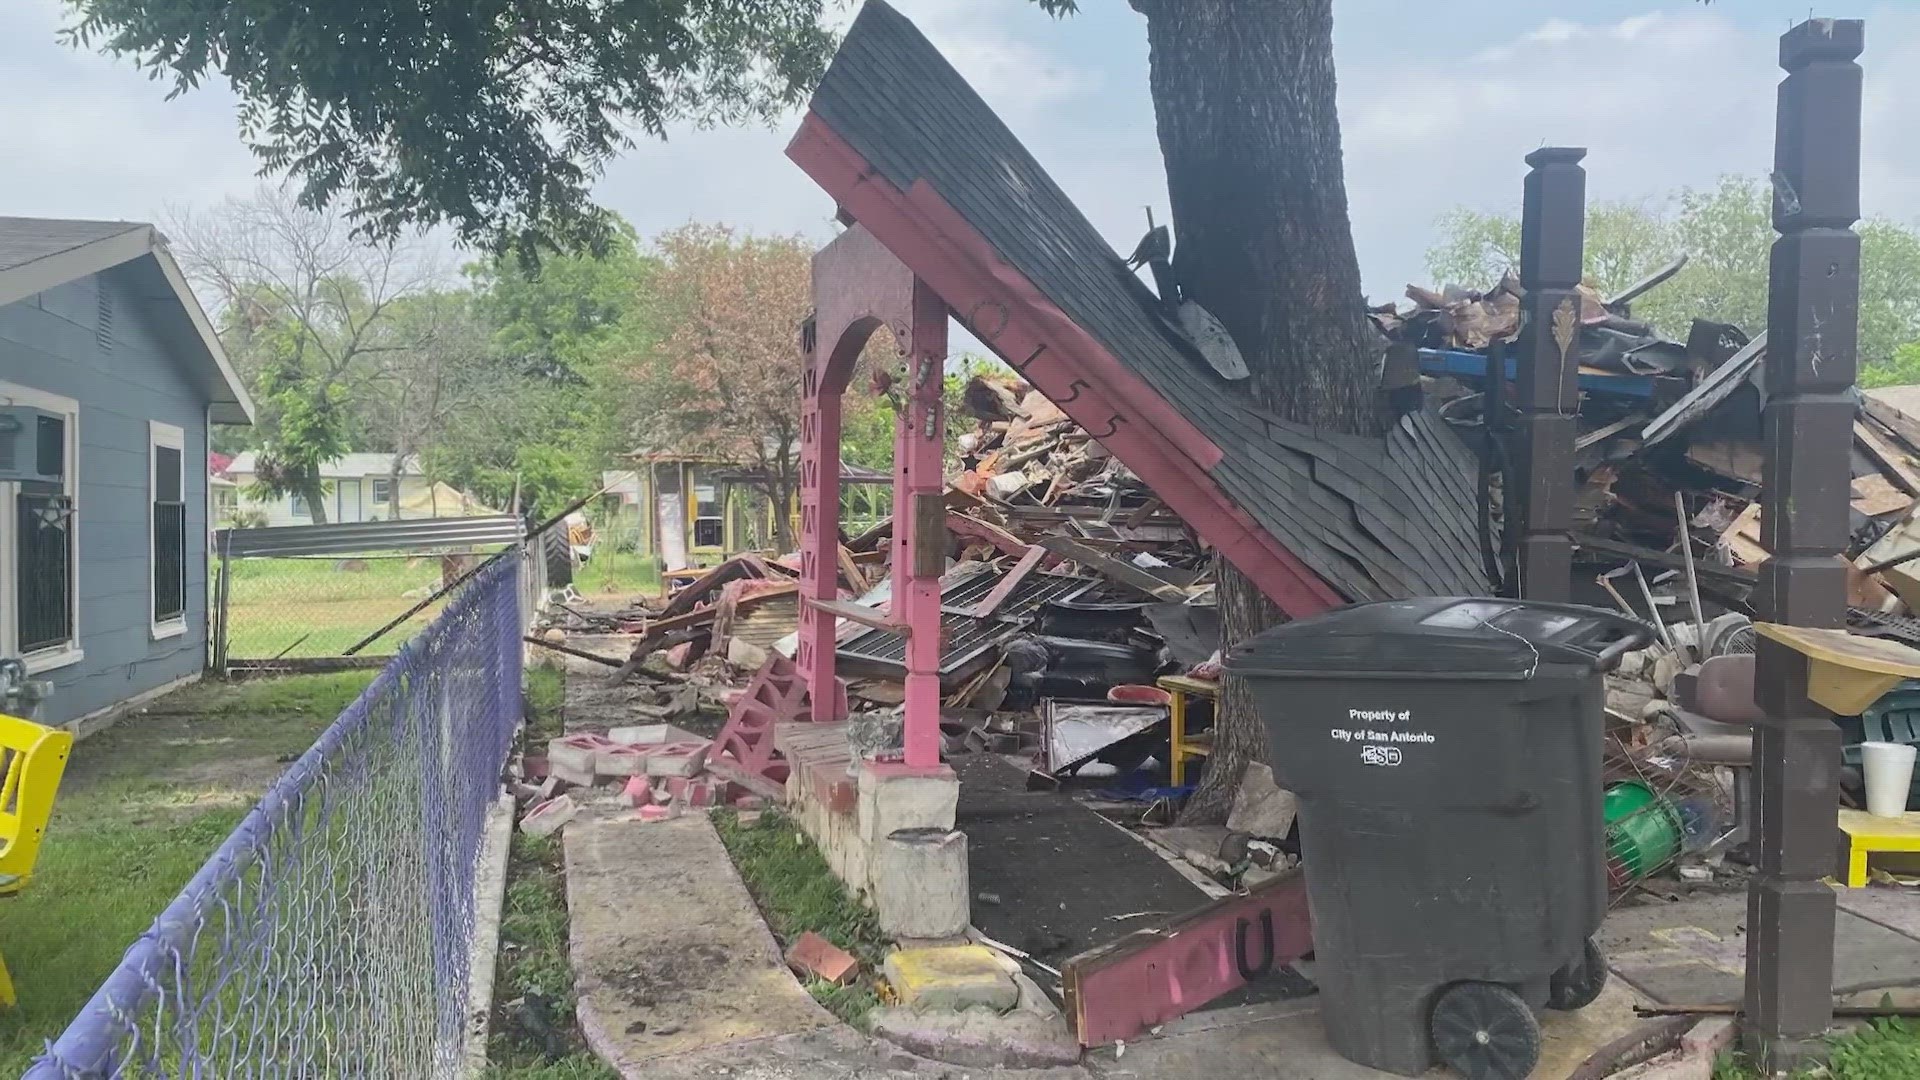 San Antonio city officials say they had to demolish the house for safety reasons. The family of the 86-year-old says the process needs to change.